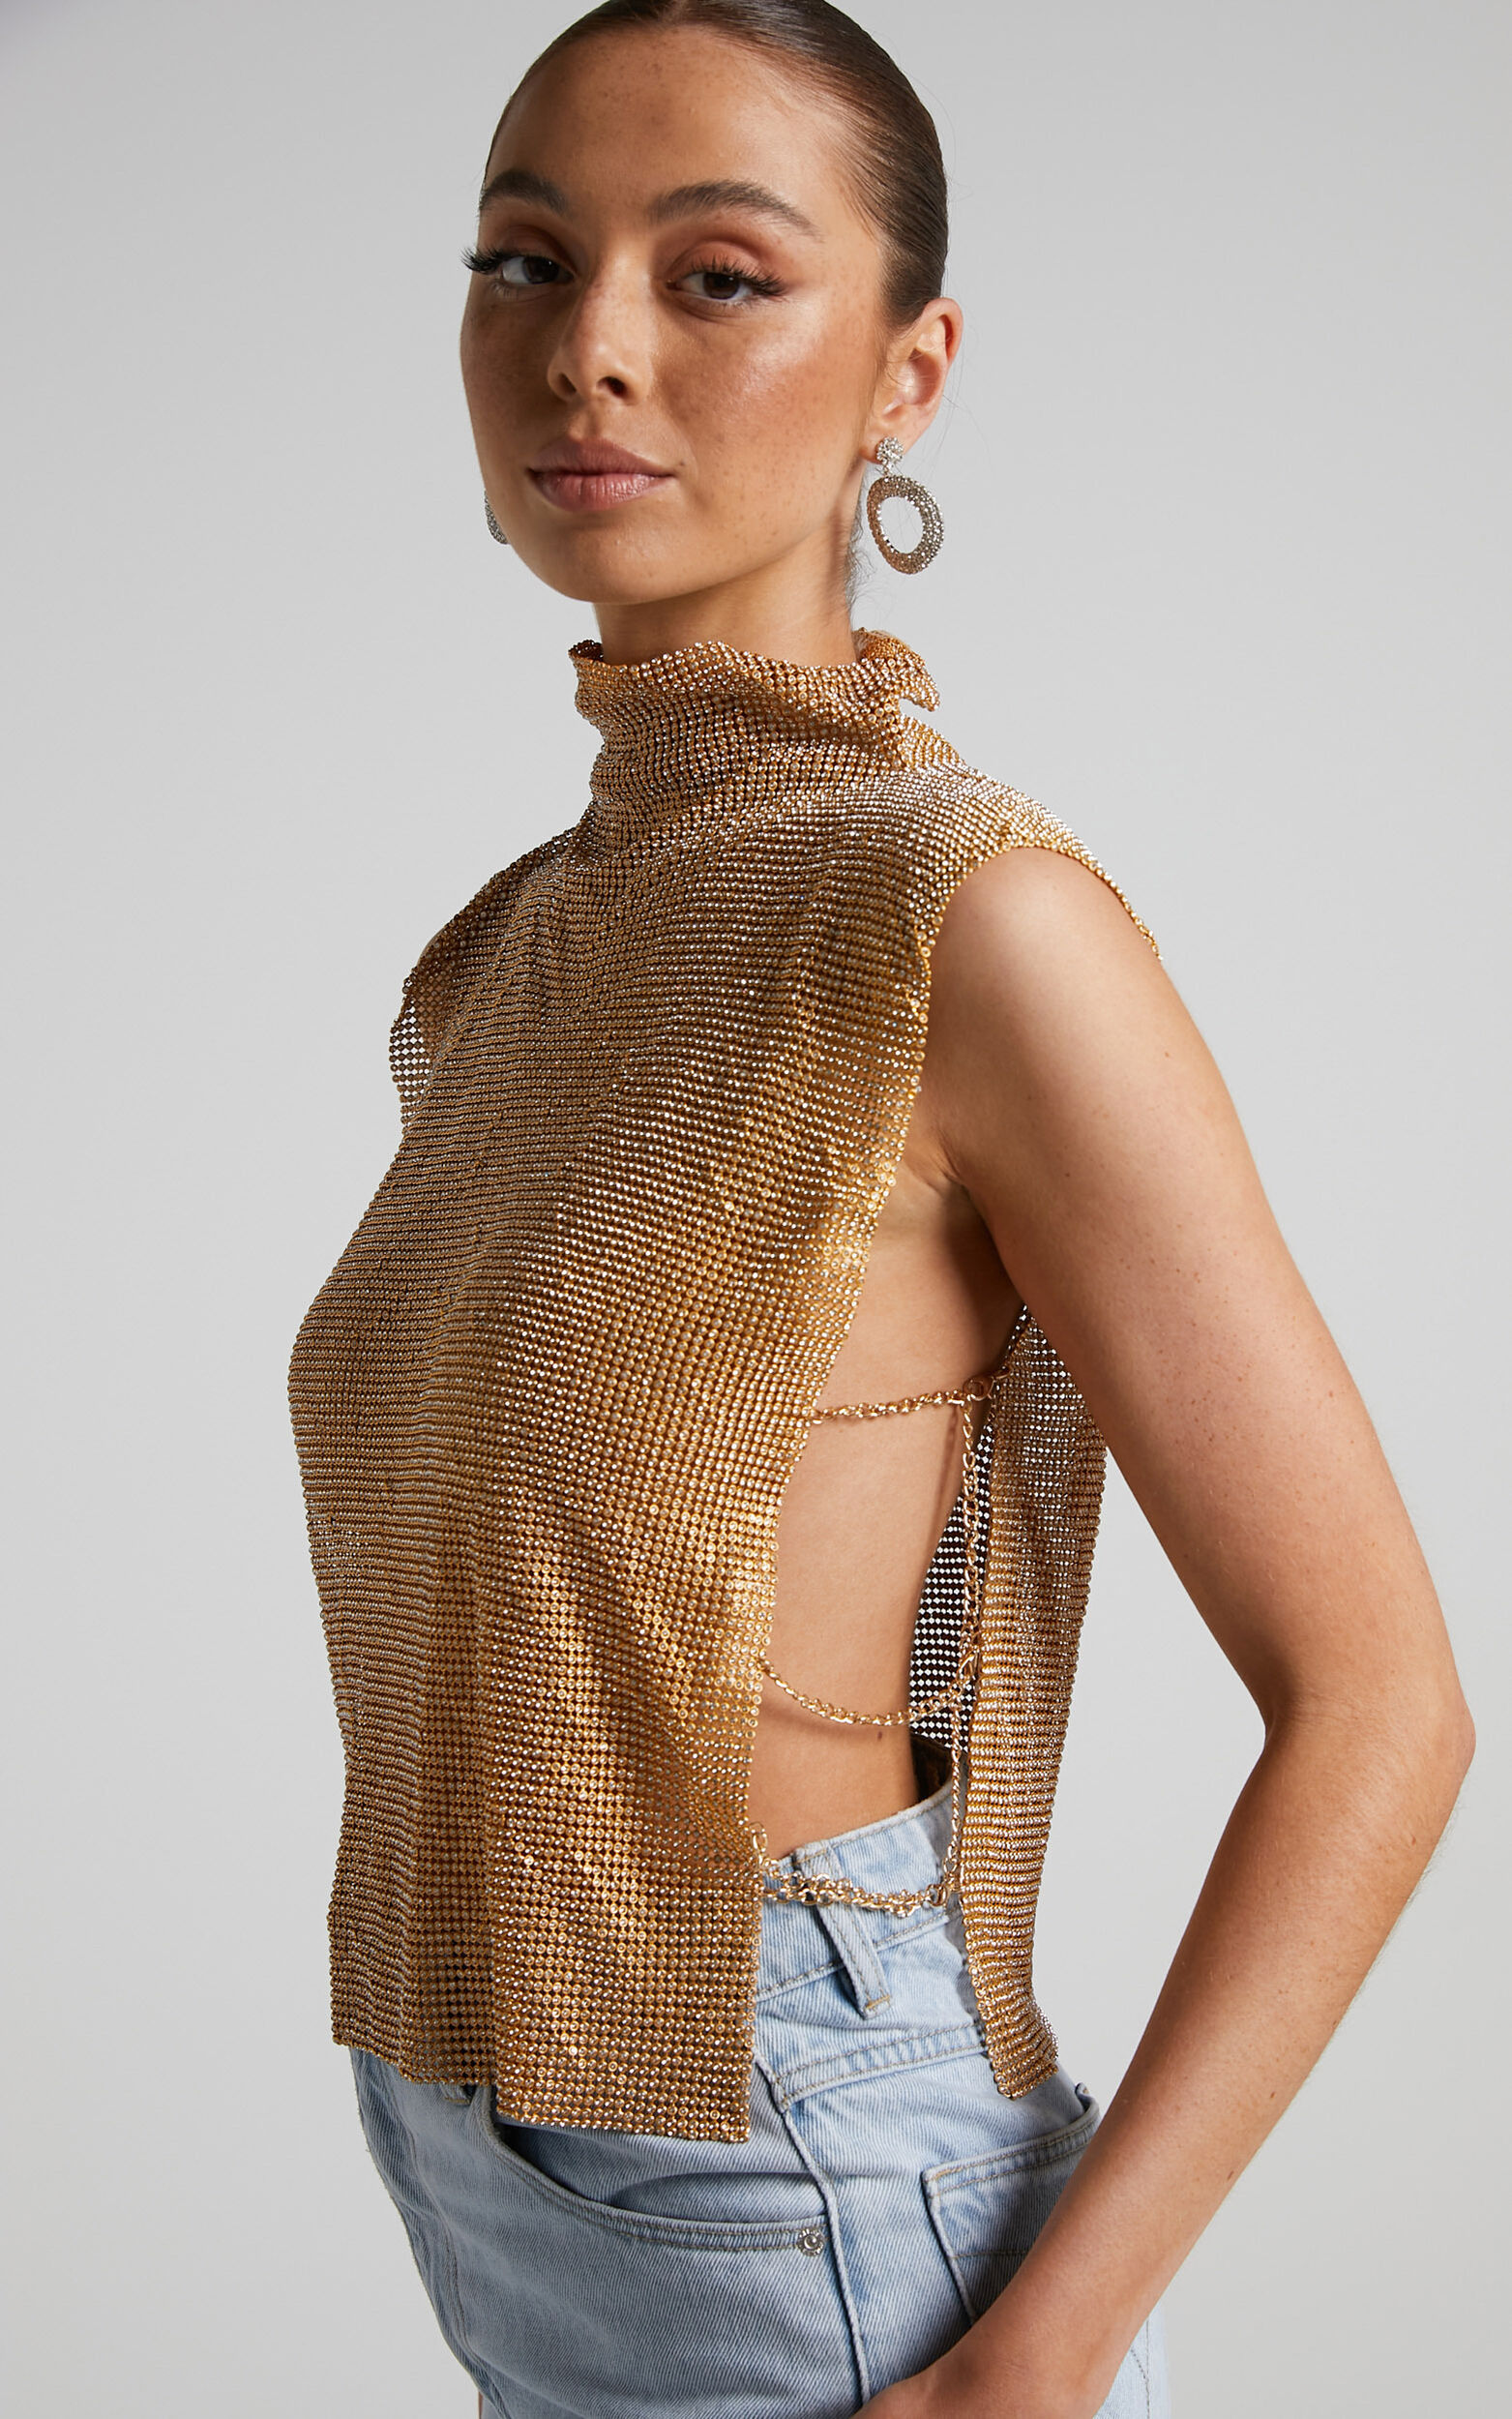 Dalena Top - Sleeveless High Neck Mesh Chainmail Top in Gold - L, GLD1